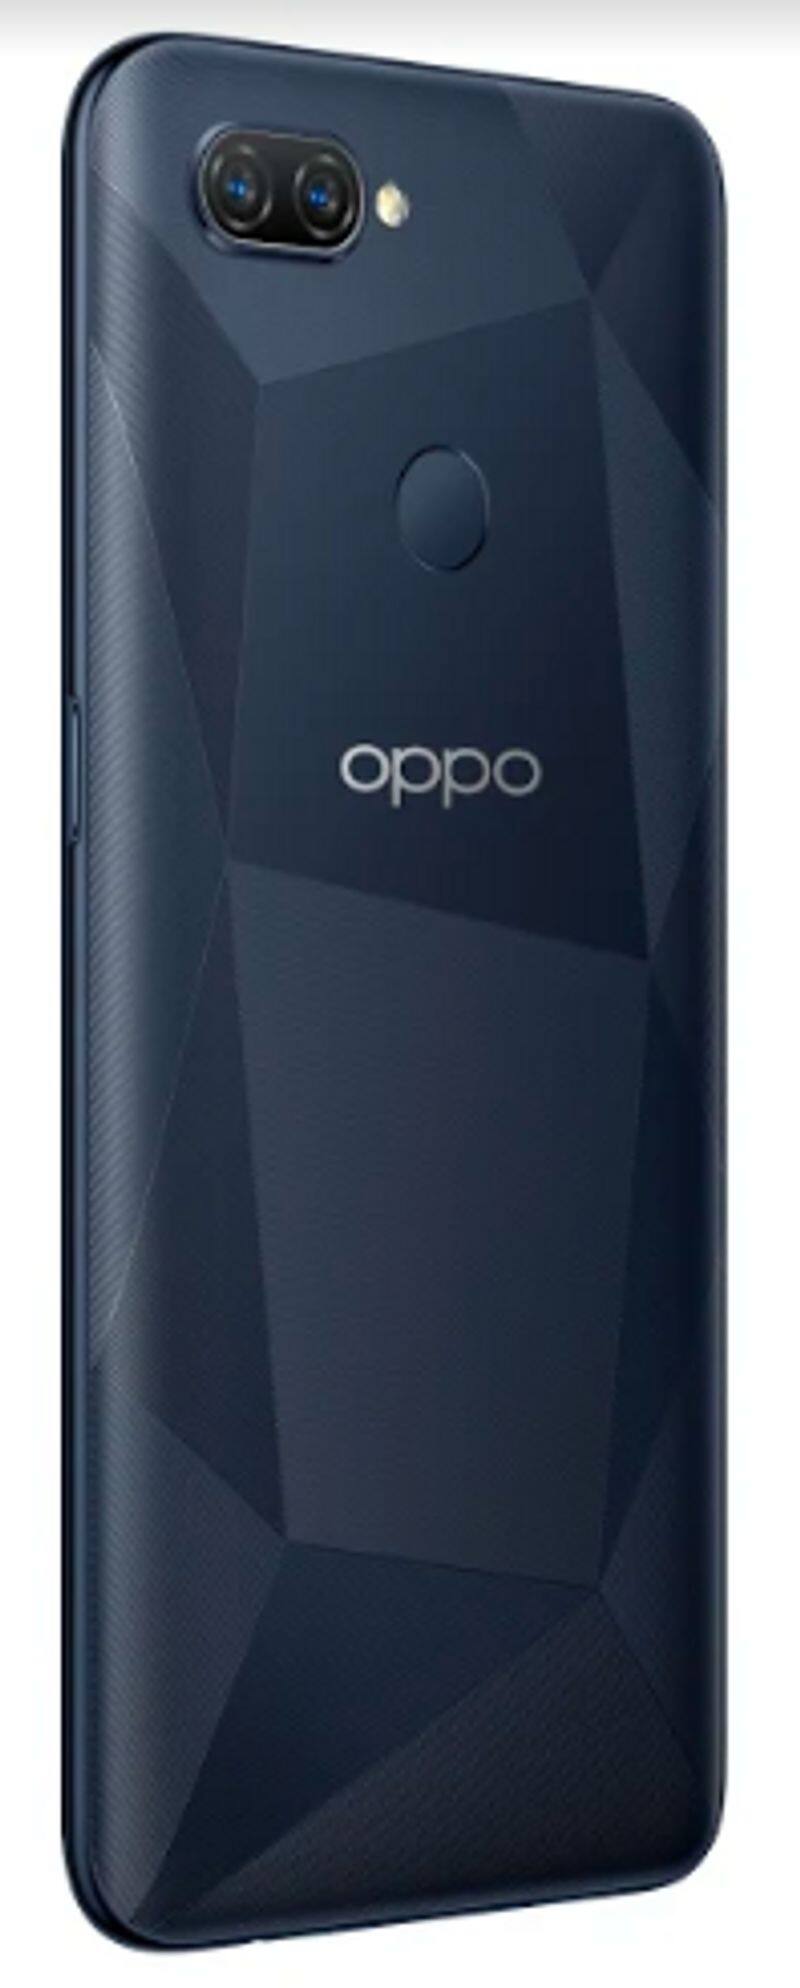 oppo launches new model of a12 with good features